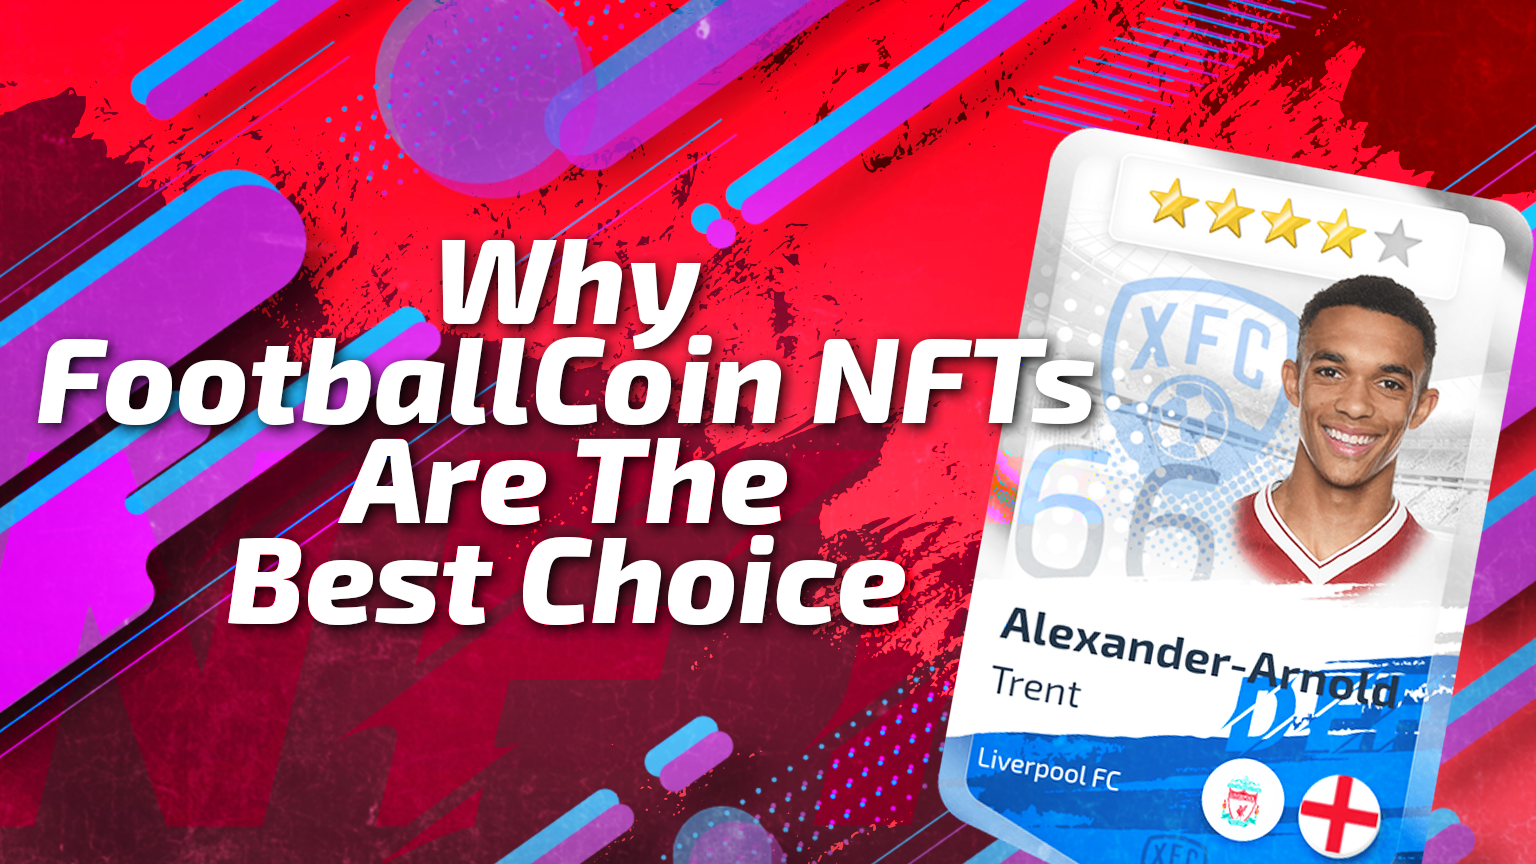 Best NFTs to Invest In: Why FootballCoin NFTs Are the Best Choice